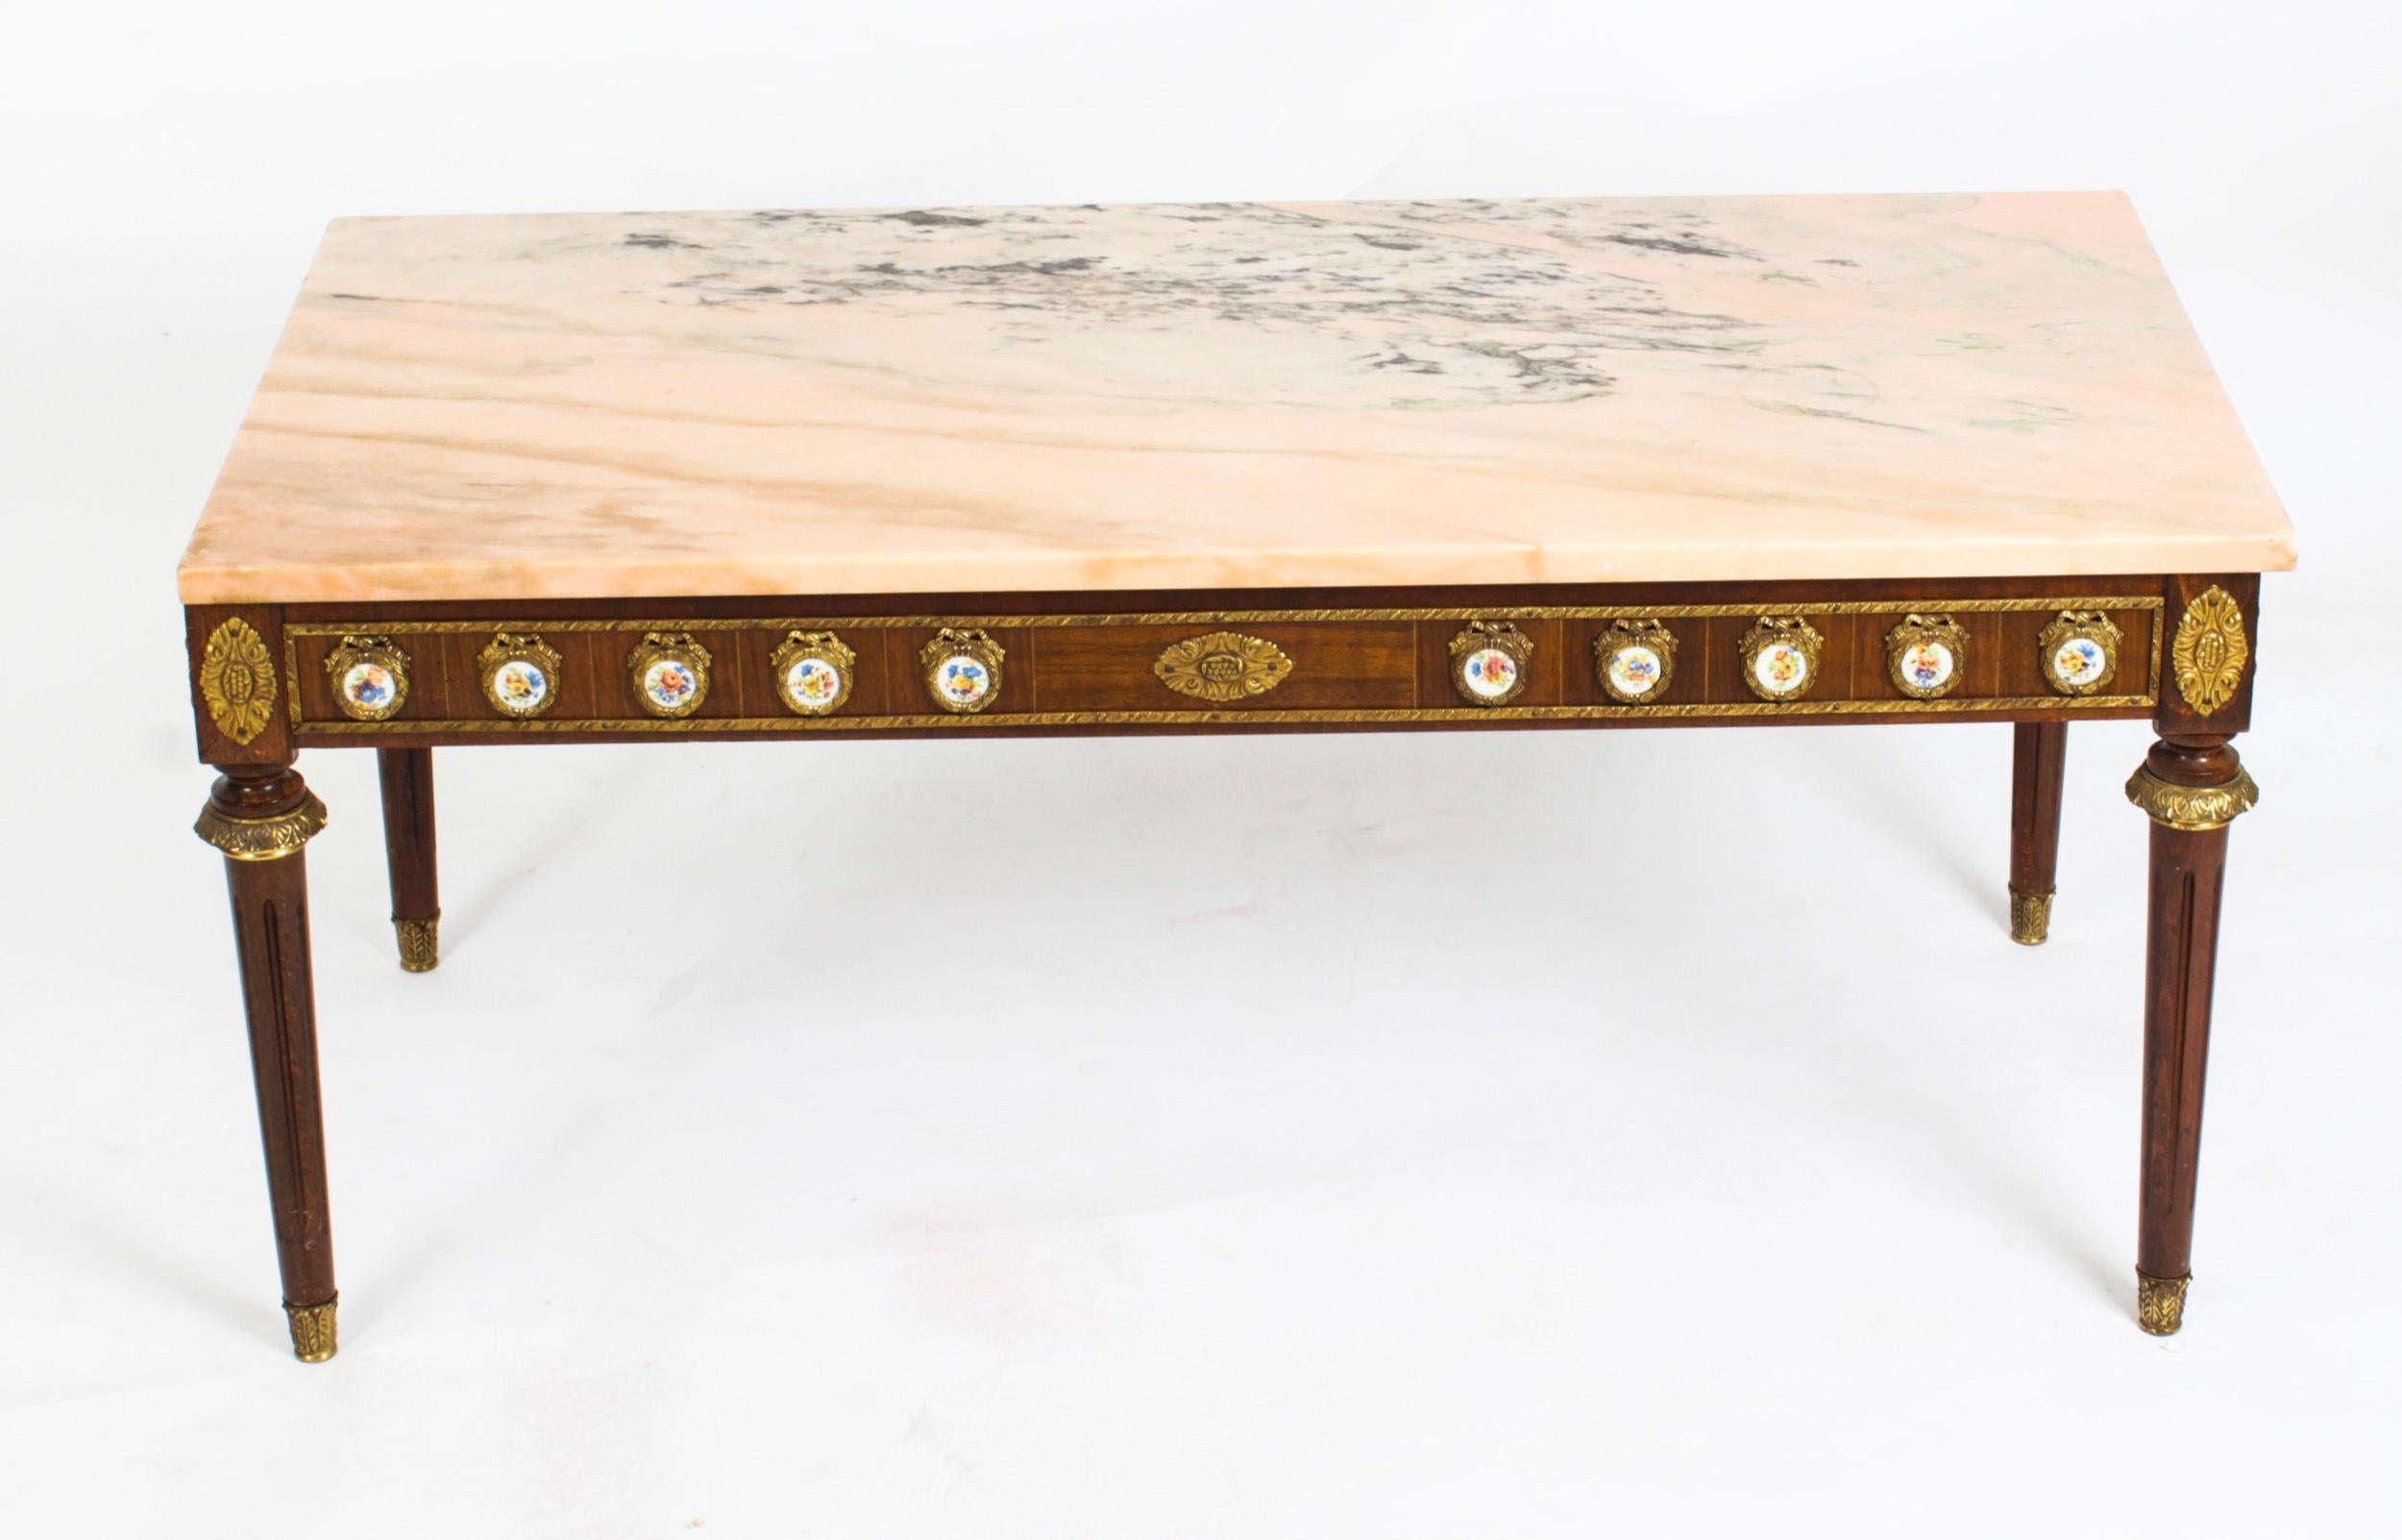 This is an exquisite ormolu-mounted walnut and marble top coffee table, circa 1950 in date and by the renowned furniture makers H & L Epstein.

This wonderful coffee table is rectangular in shape and has four elegant and stylish tapering fluted